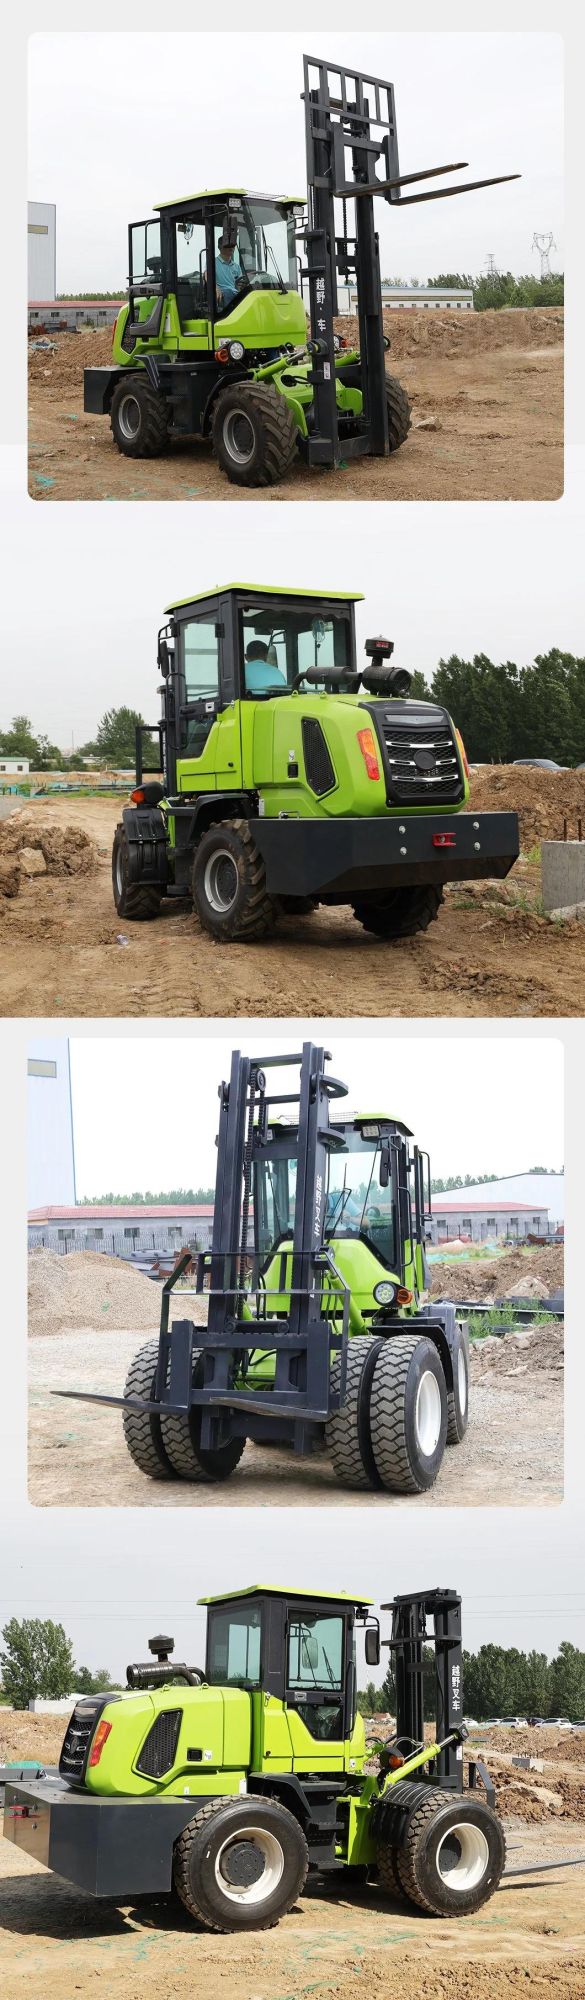 Four-Wheel Drive Cross-Country Truck Mounted 3.5 Ton Diesel Forklift Diesel Forklift 5 Ton Diesel Forklift